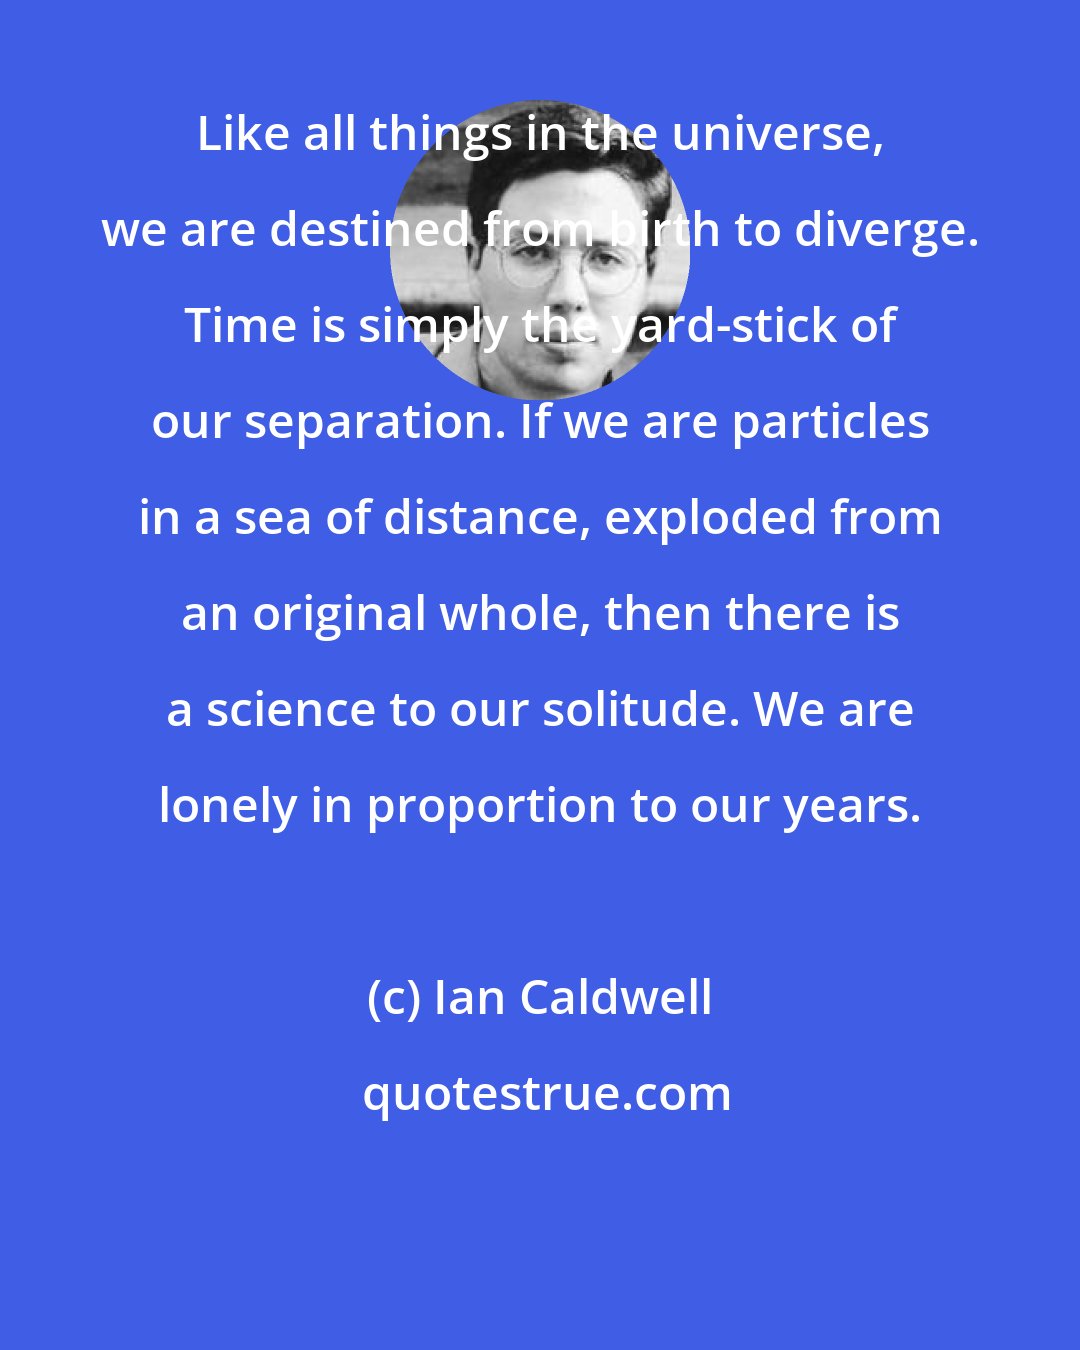 Ian Caldwell: Like all things in the universe, we are destined from birth to diverge. Time is simply the yard-stick of our separation. If we are particles in a sea of distance, exploded from an original whole, then there is a science to our solitude. We are lonely in proportion to our years.